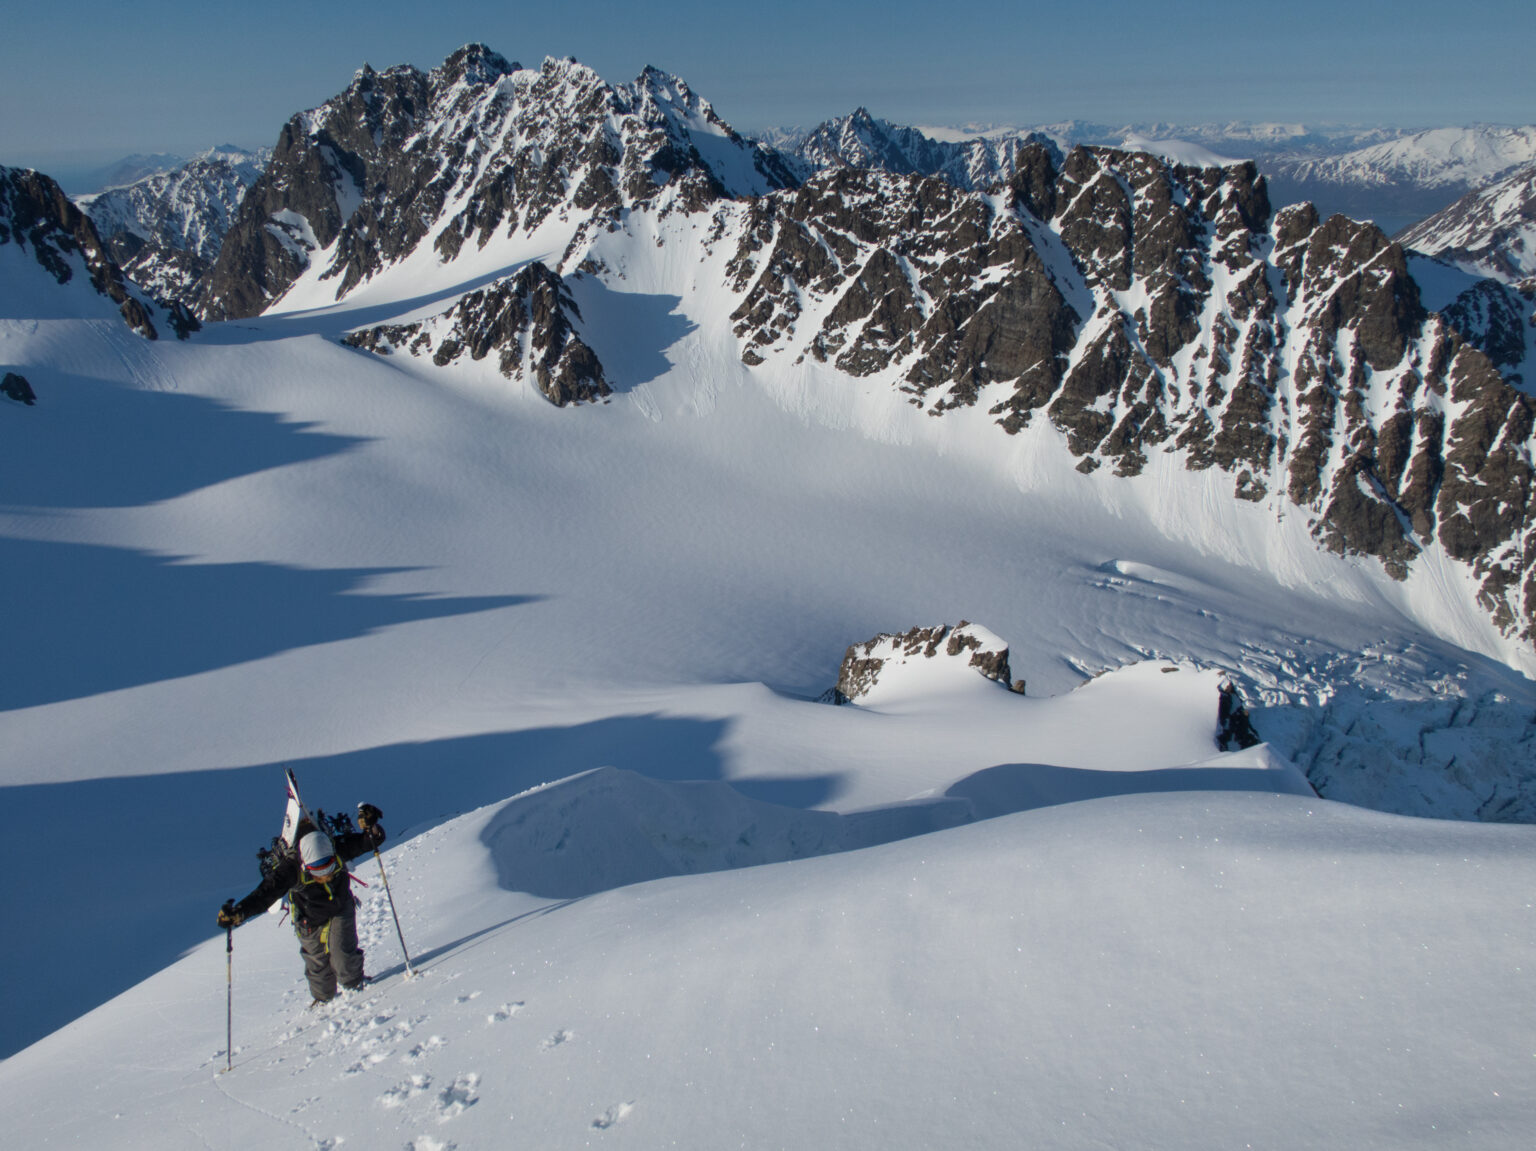 Climbing up the final pitch of Tvillingtinden with the Lyngen Alps of Norway in the background